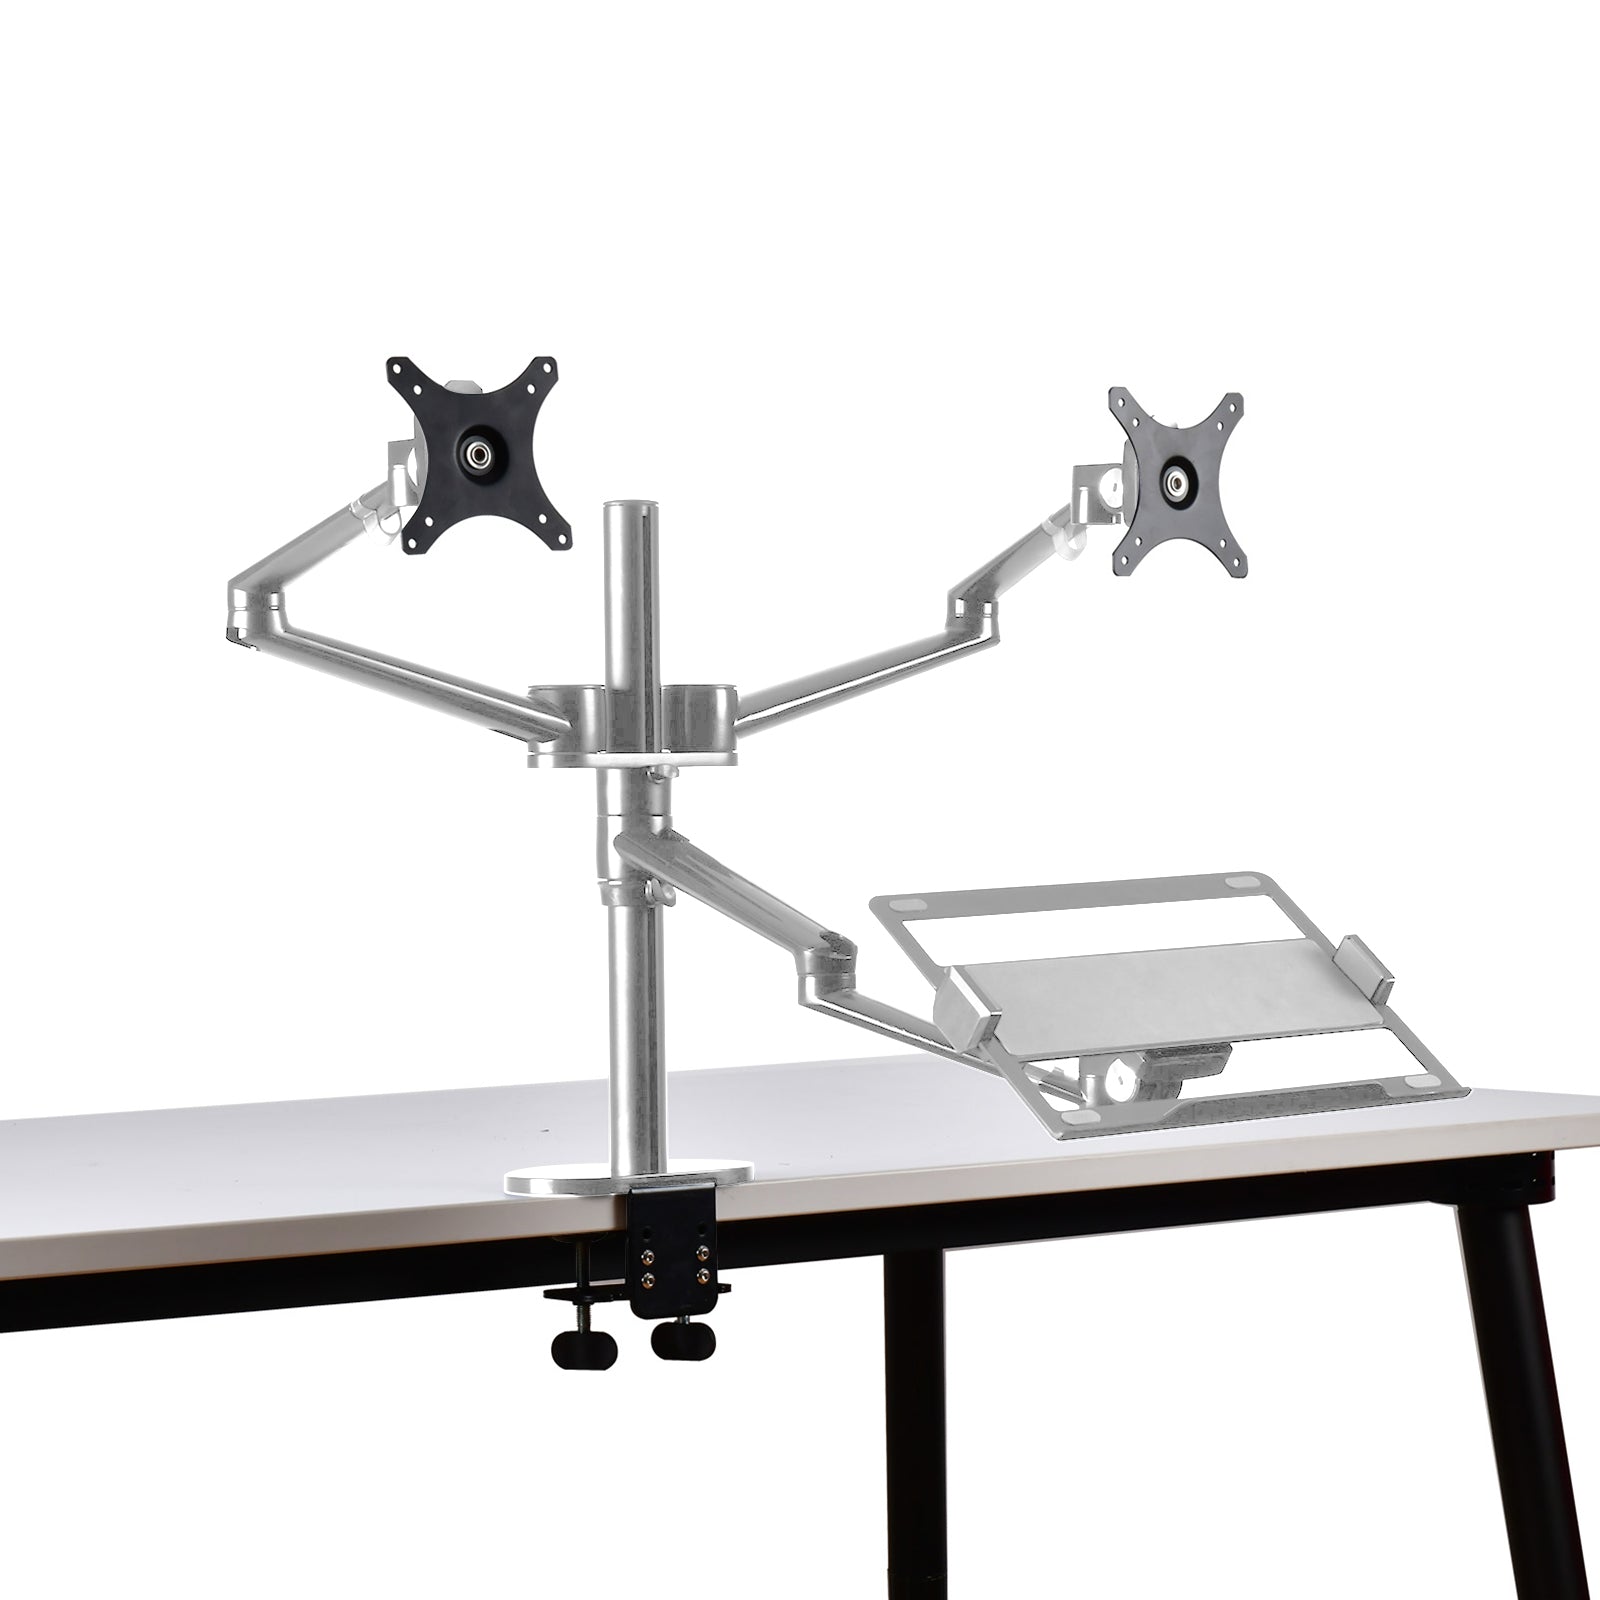 Aeons Dual Monitor and Laptop Tray Desk Mount, 3-in-1 Adjustable Triple Arm fits 27 inch Screen with VESA, Clamp and Cable Management, Silver